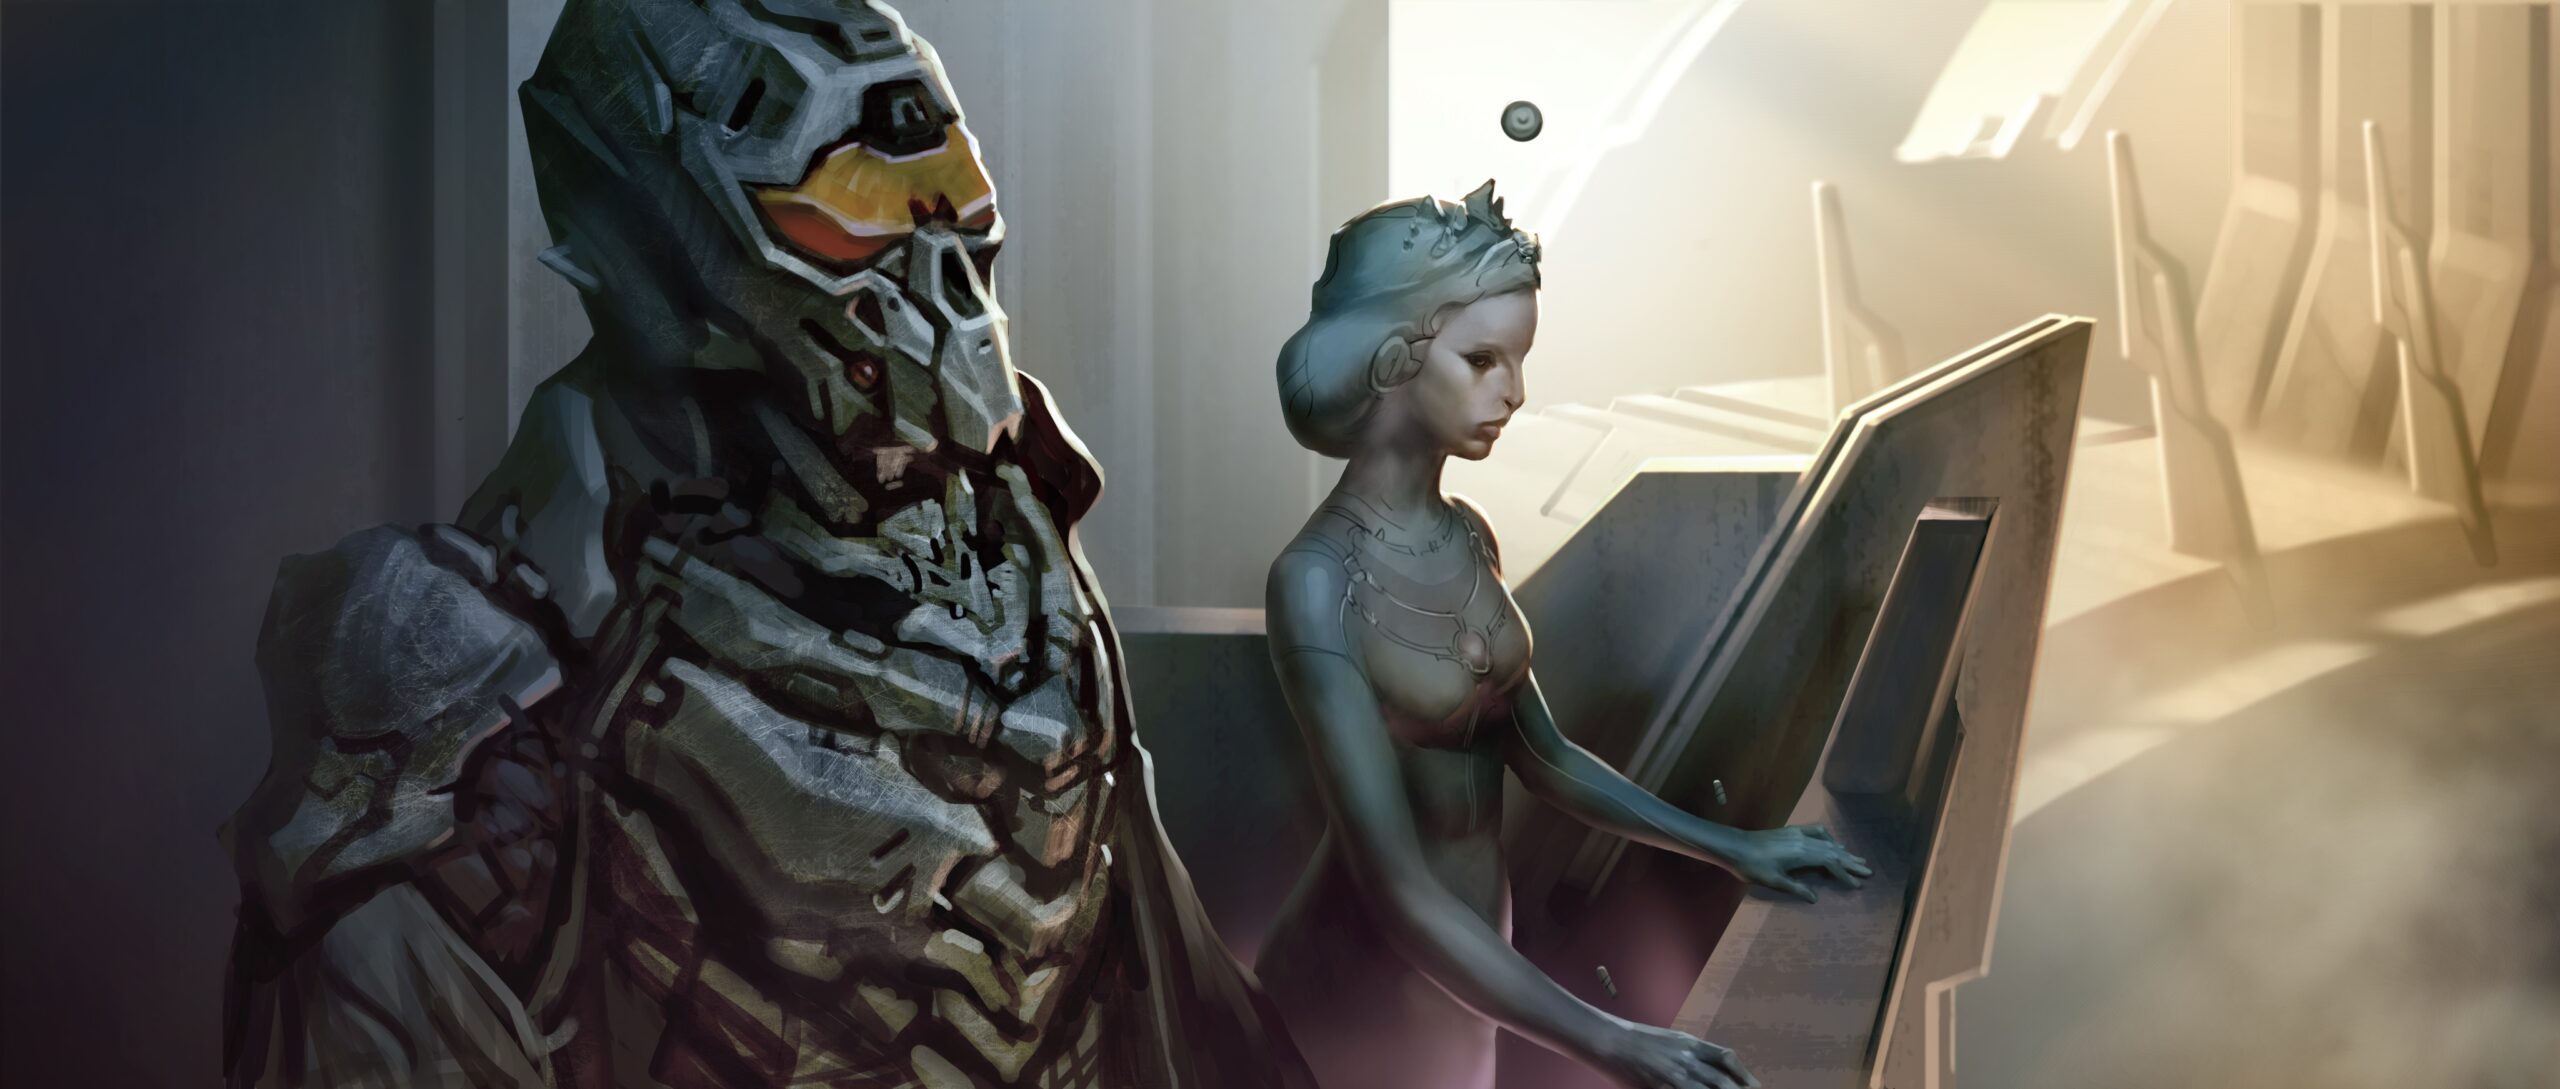 Halo 4 concept art of the Didact and Librarian on Charum Hakkor